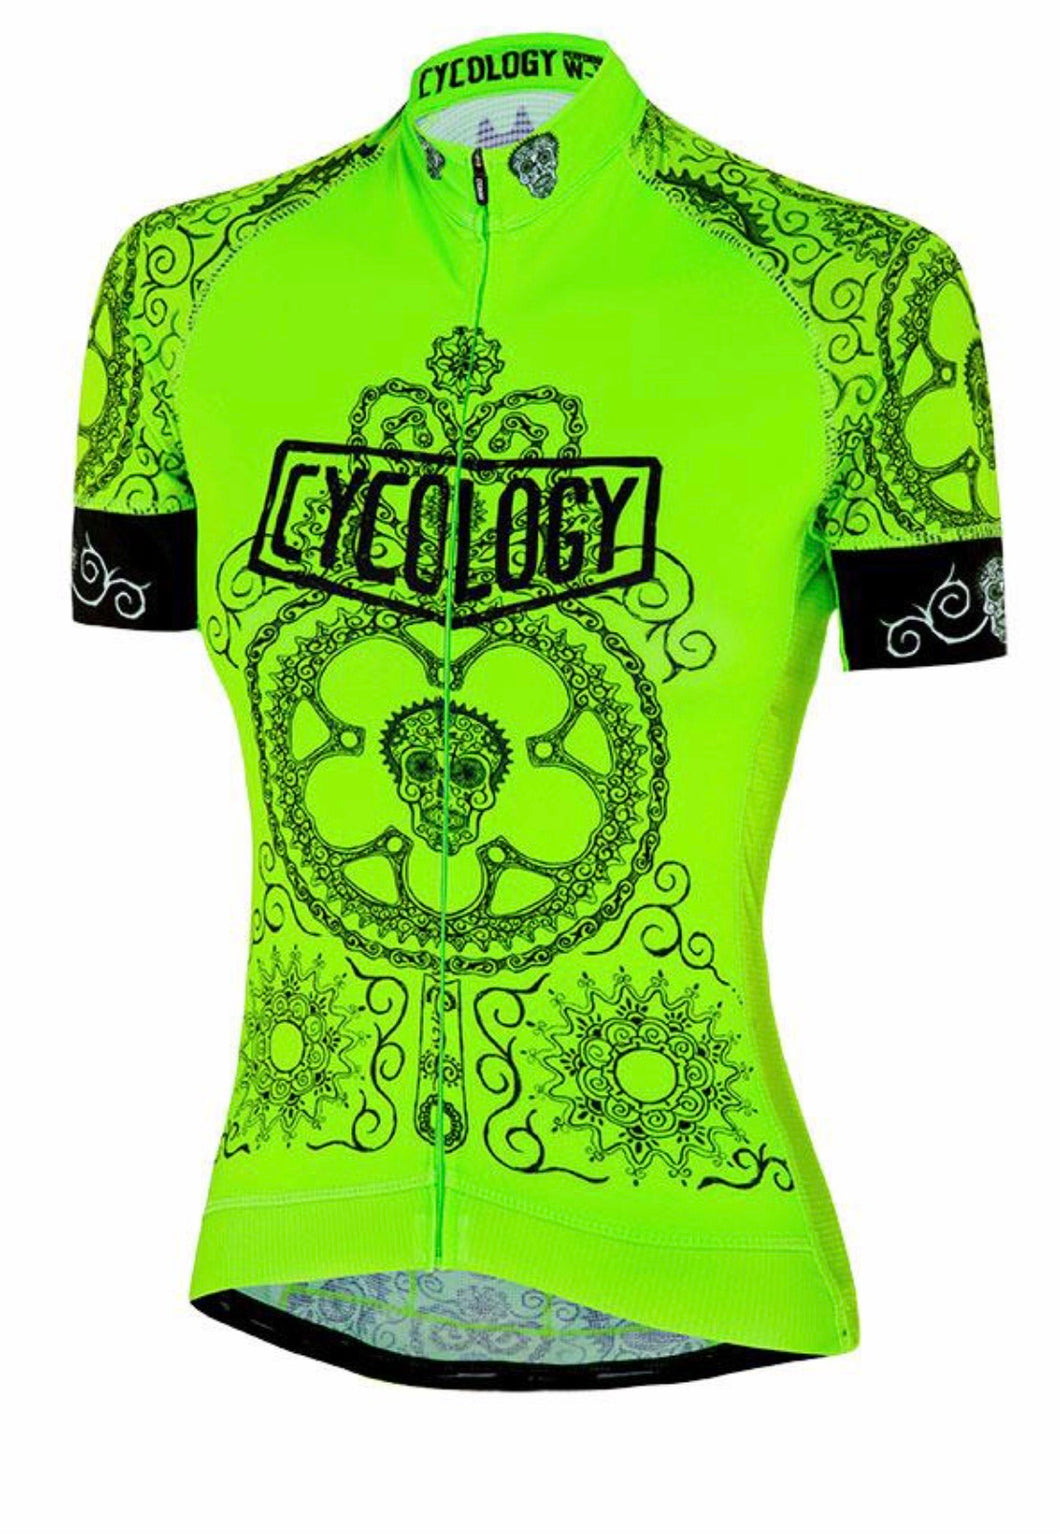 Cycology Quality Womens Jersey - Design Day of the Living Lime